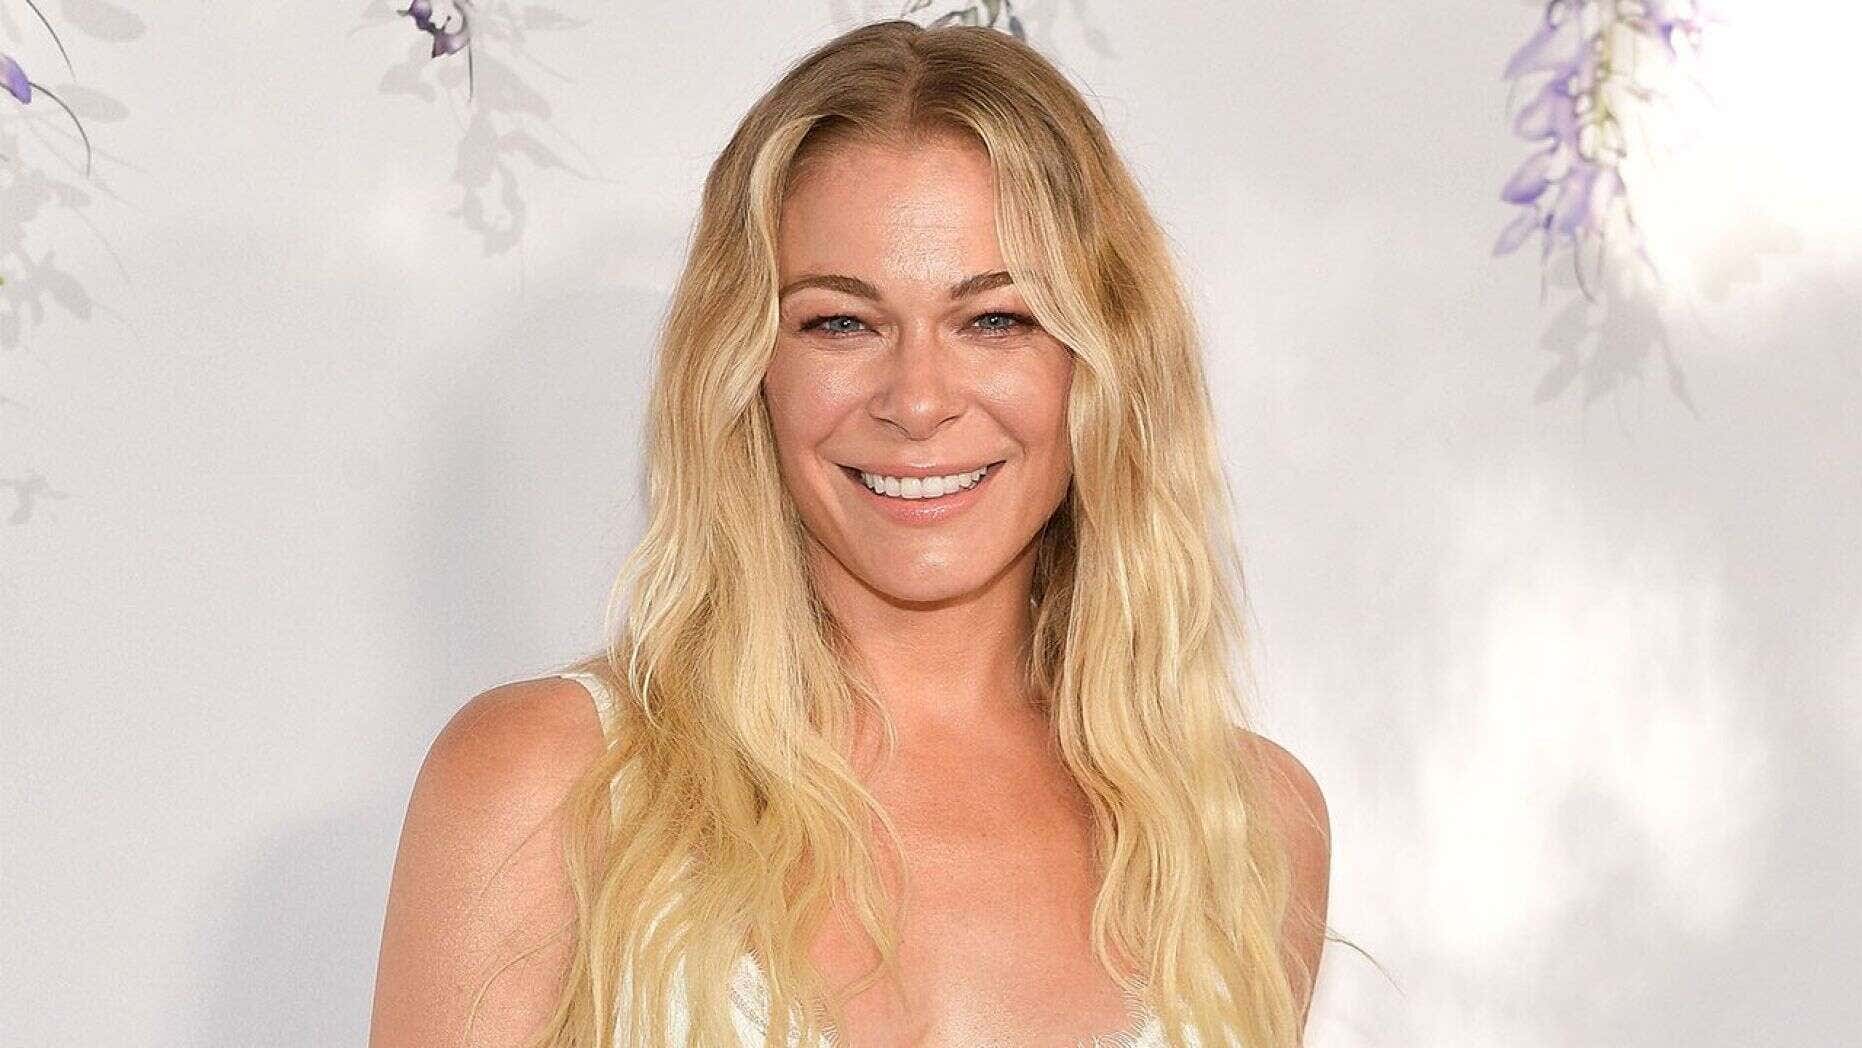 LeAnn Rimes says new album 'God's Work' is an 'inspirational record': We need to 'love one another'